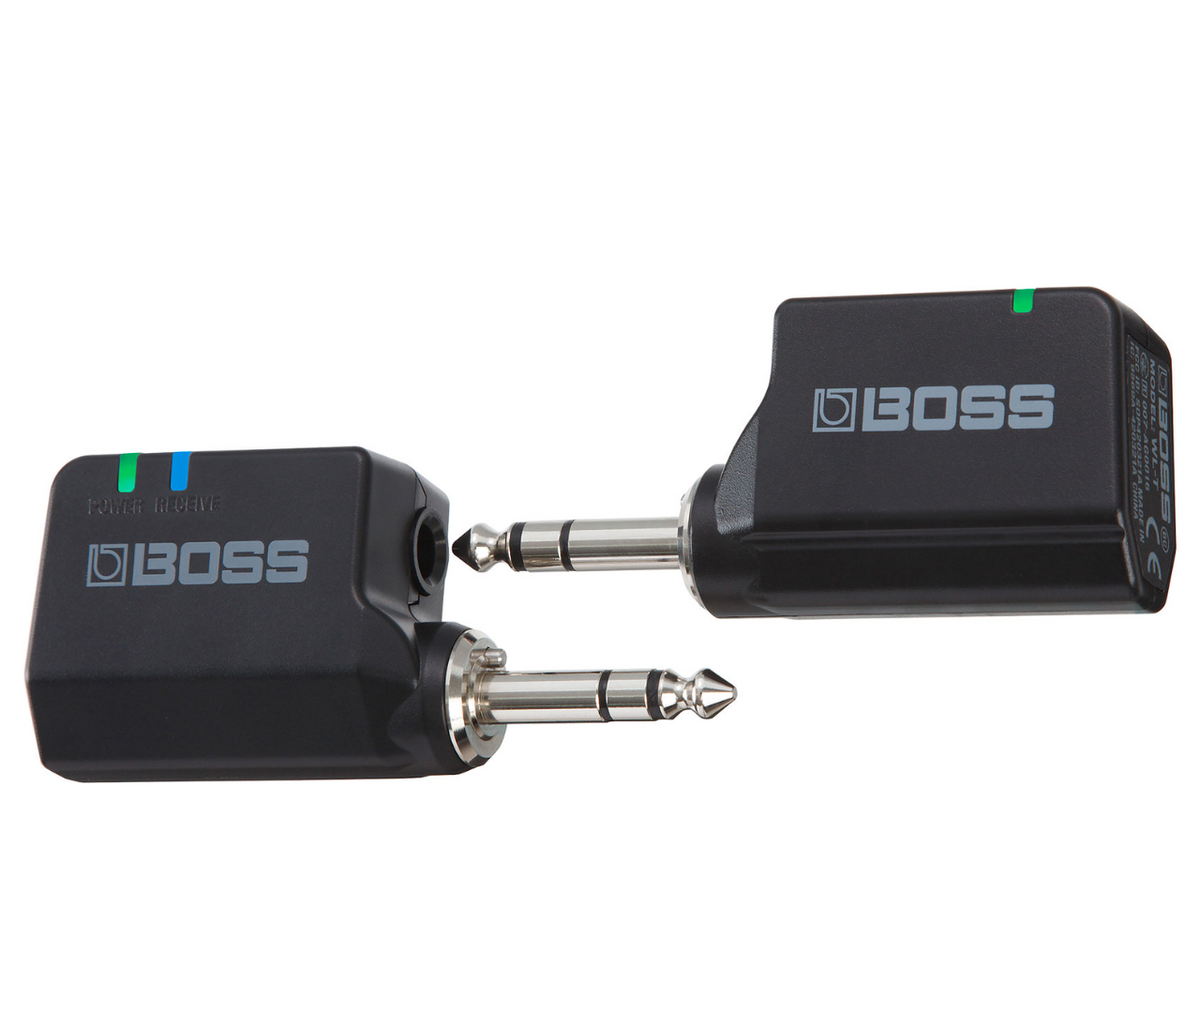 BOSS WL-20 Best Guitar Wireless System Plug-and-Play Wireless Systems for Guitar, Bass, and Other Electronic Instruments